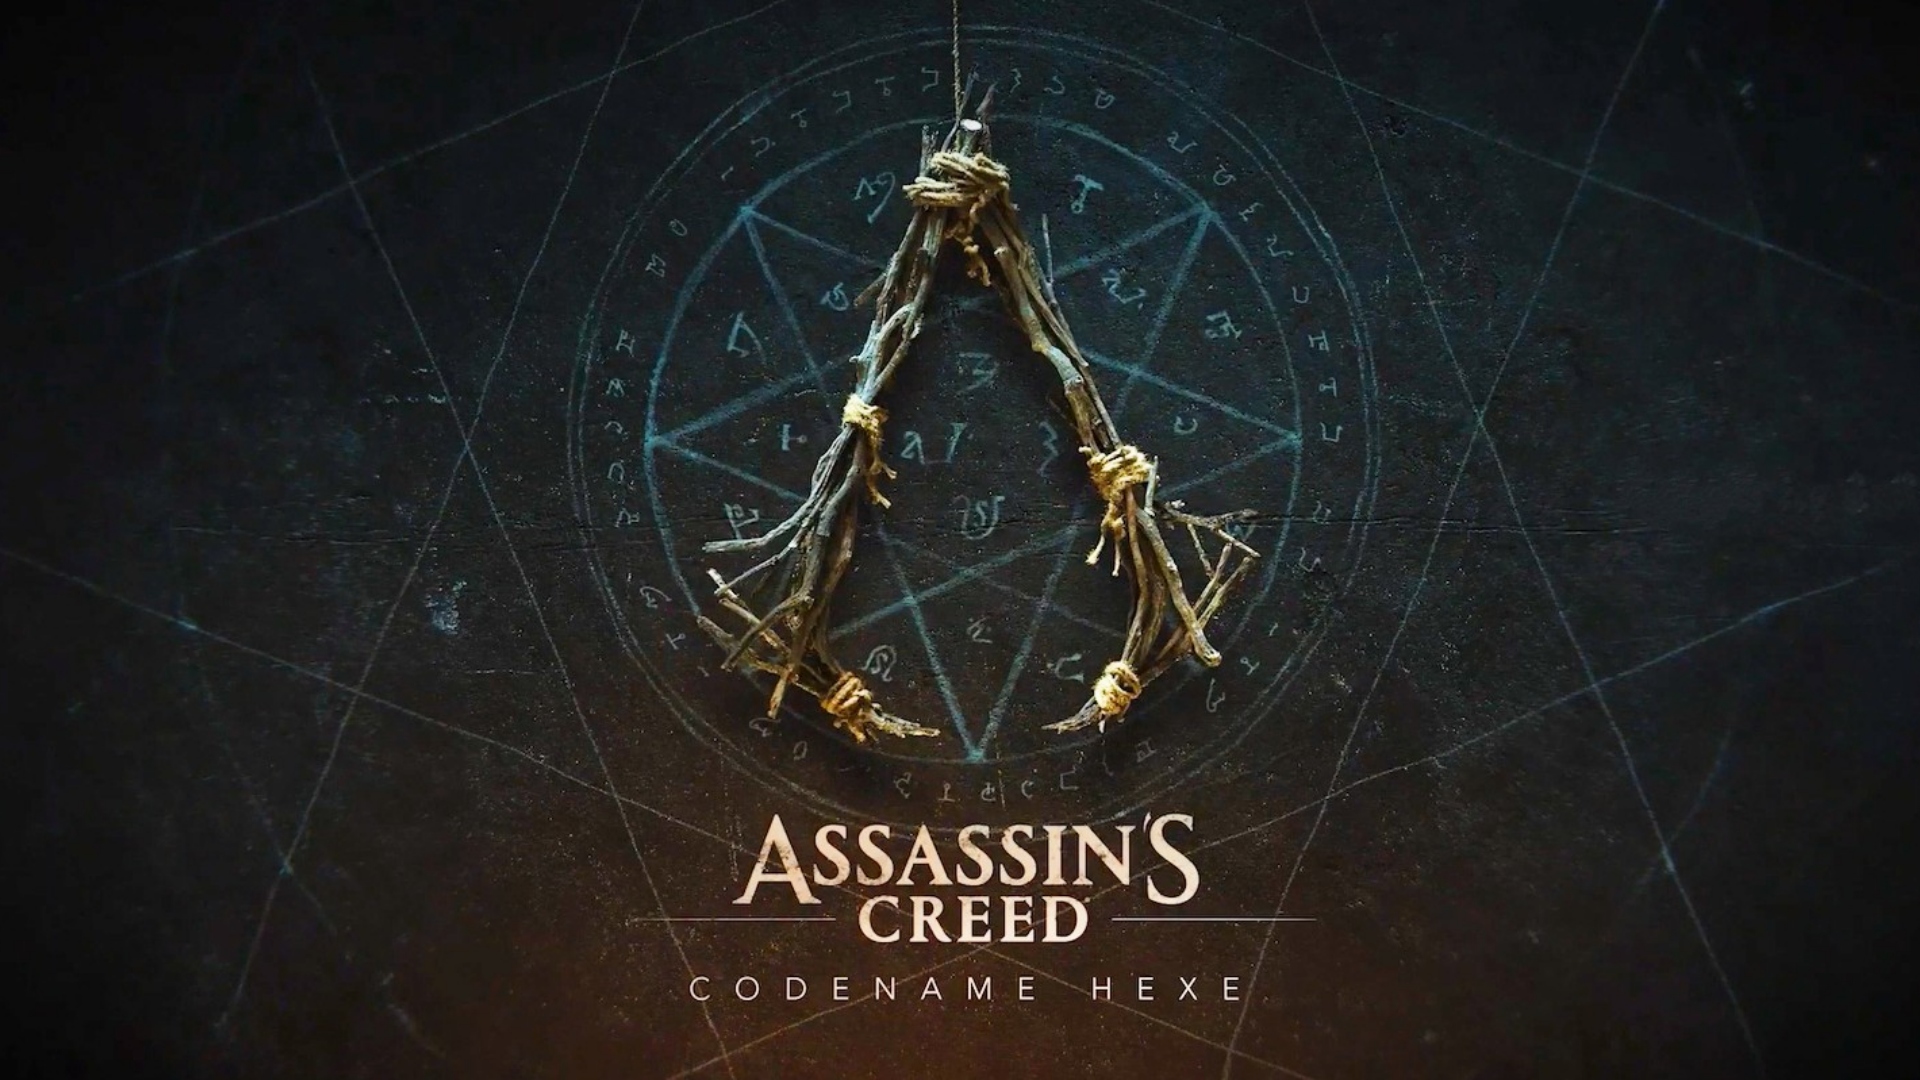 Assassin’s Creed Infinity brings back multiplayer and new game Hexe: the codex screen from Assassin's Creed Hexe